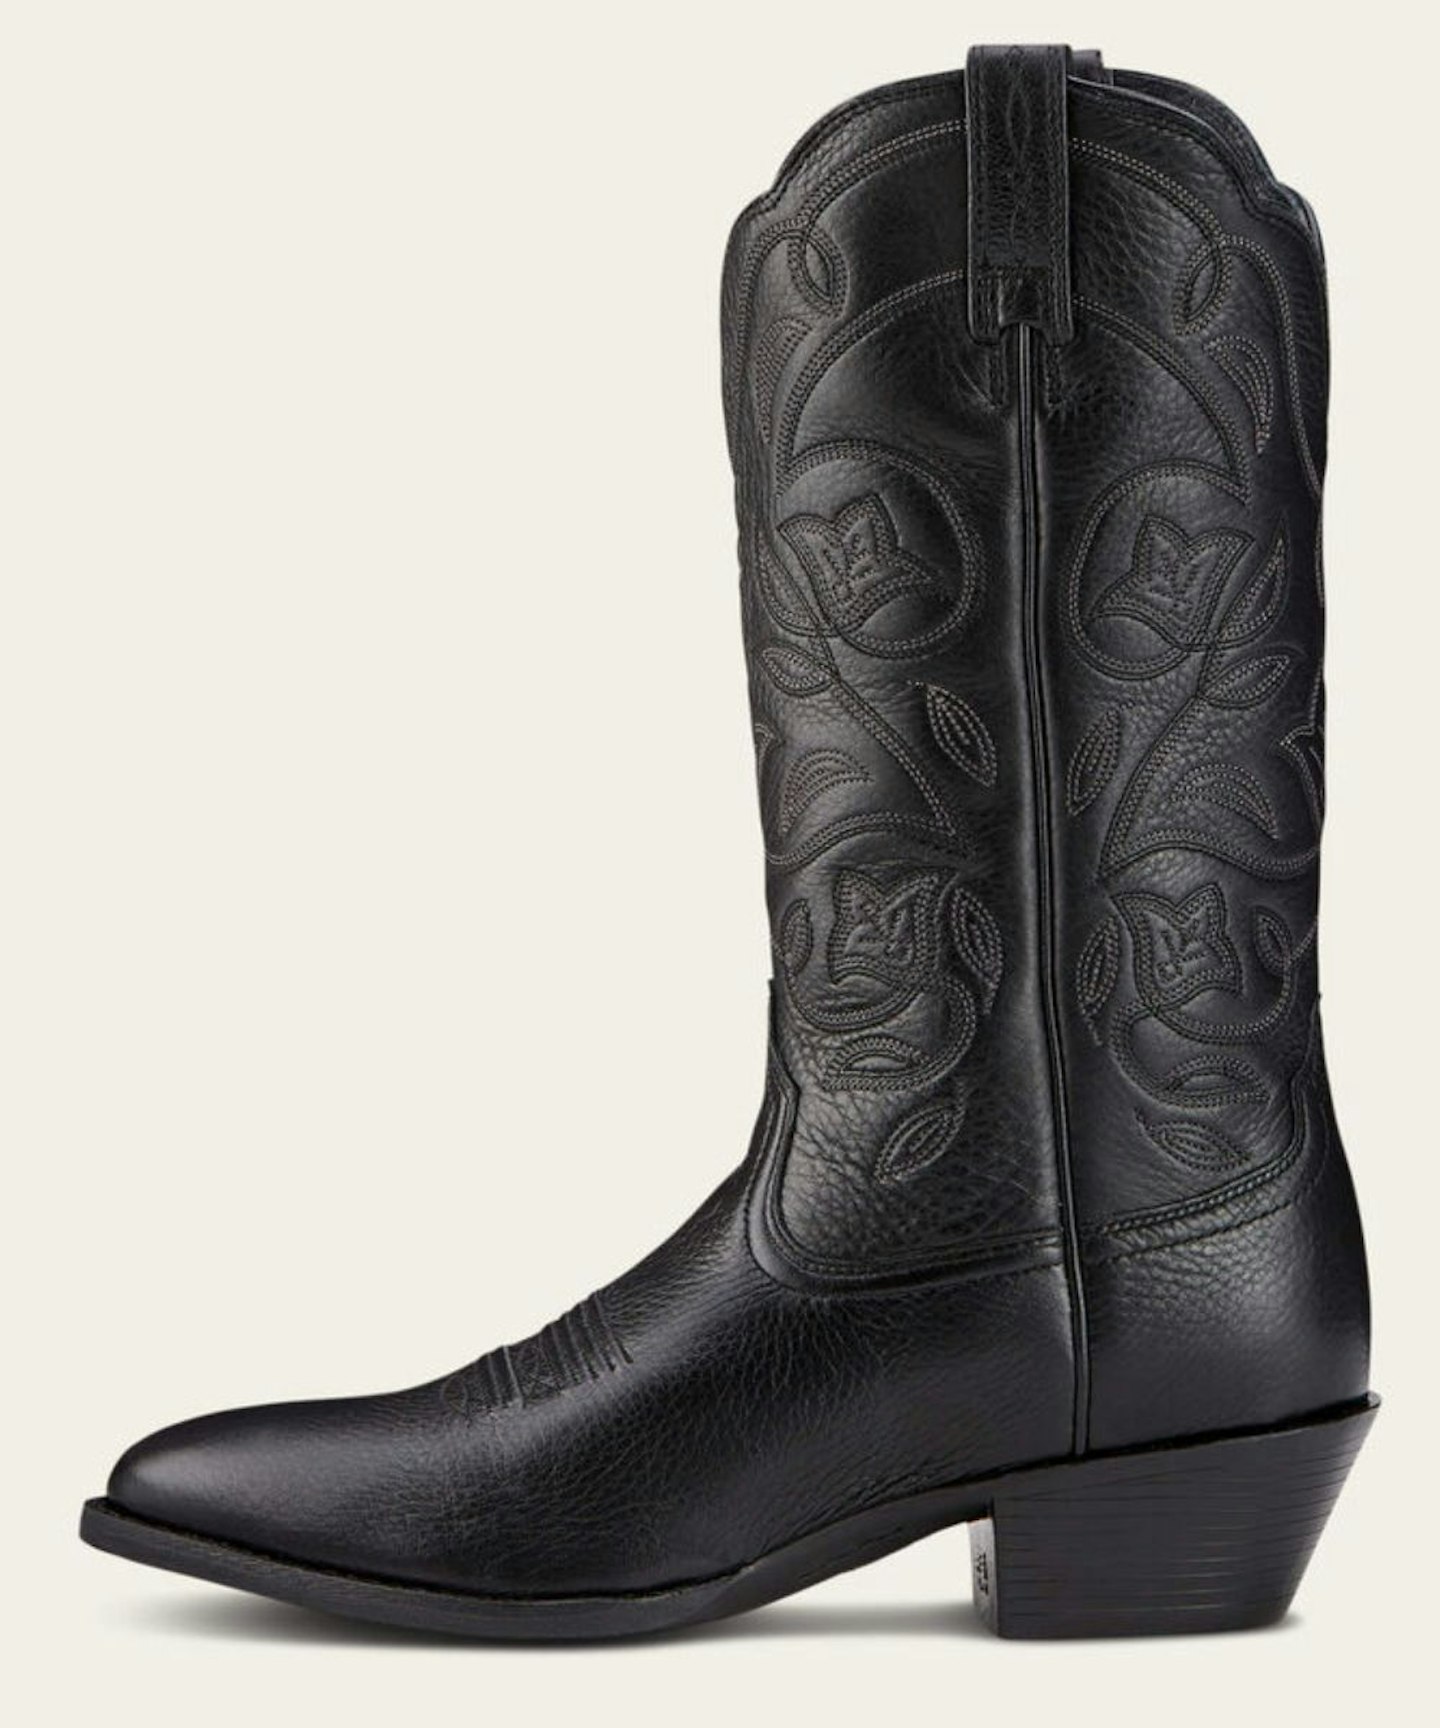 Heritage R Toe Western Boot, Ariat